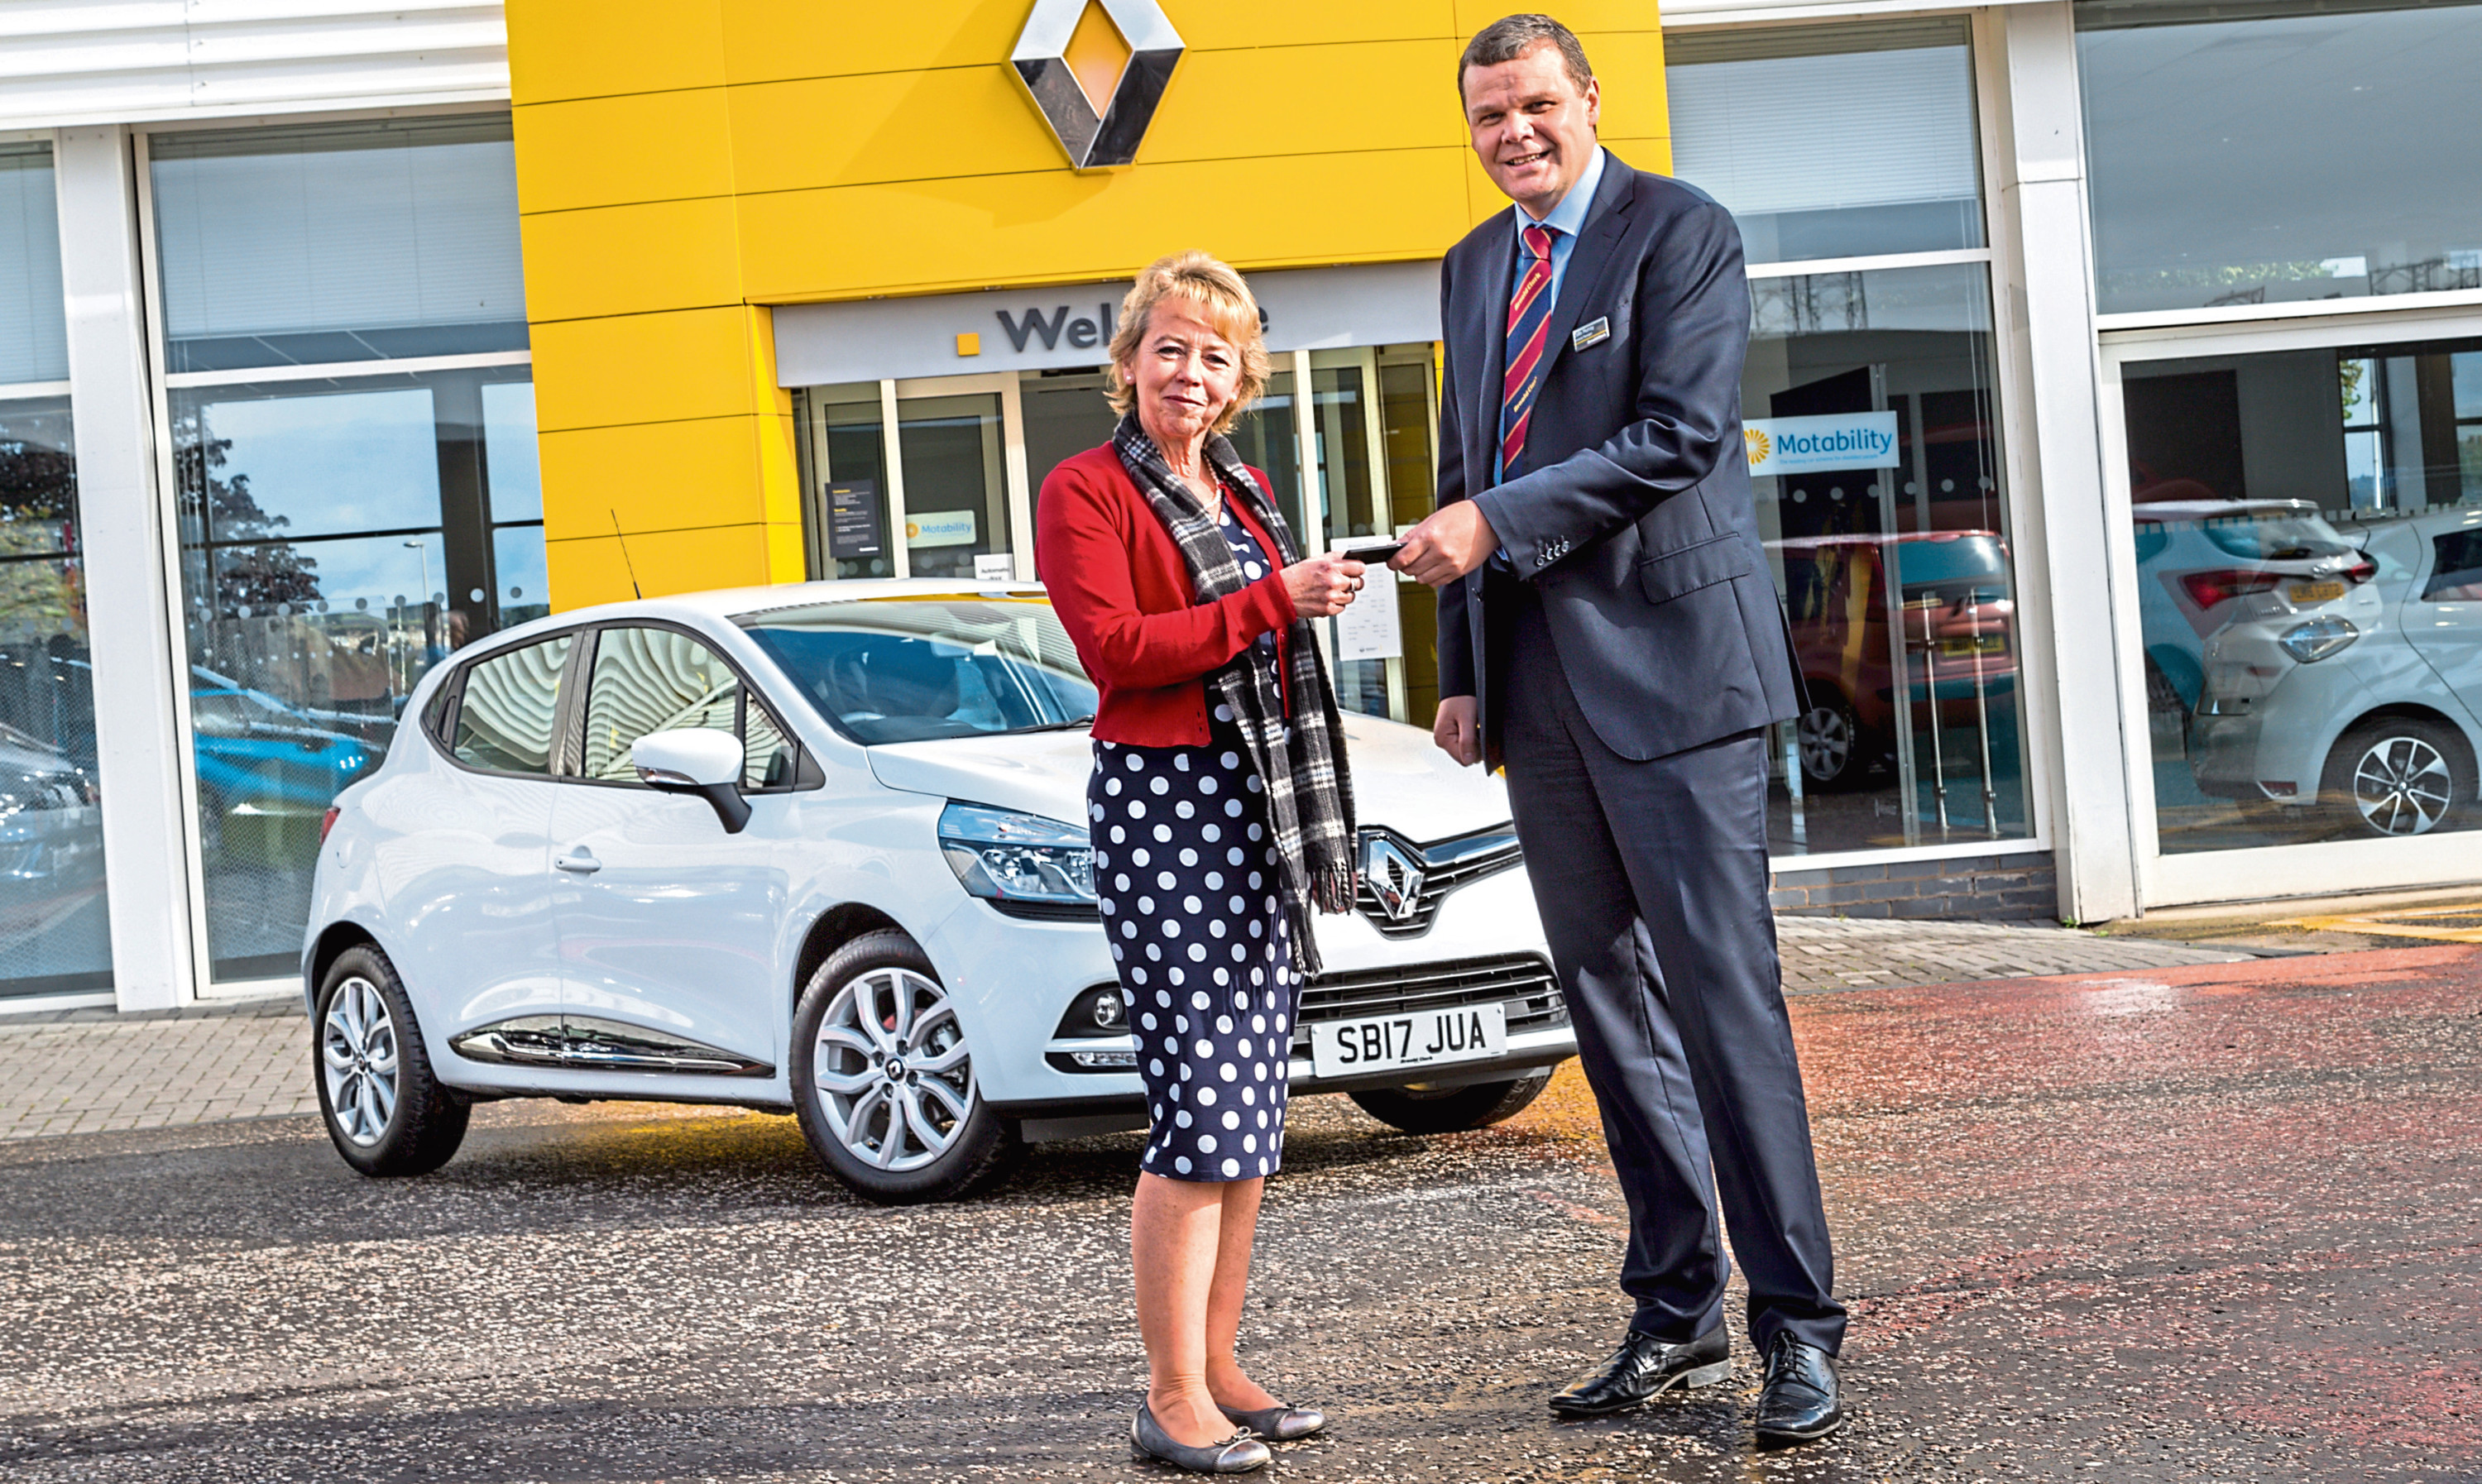 A customer receives the kes to their new car at an Arnold Clark dealership